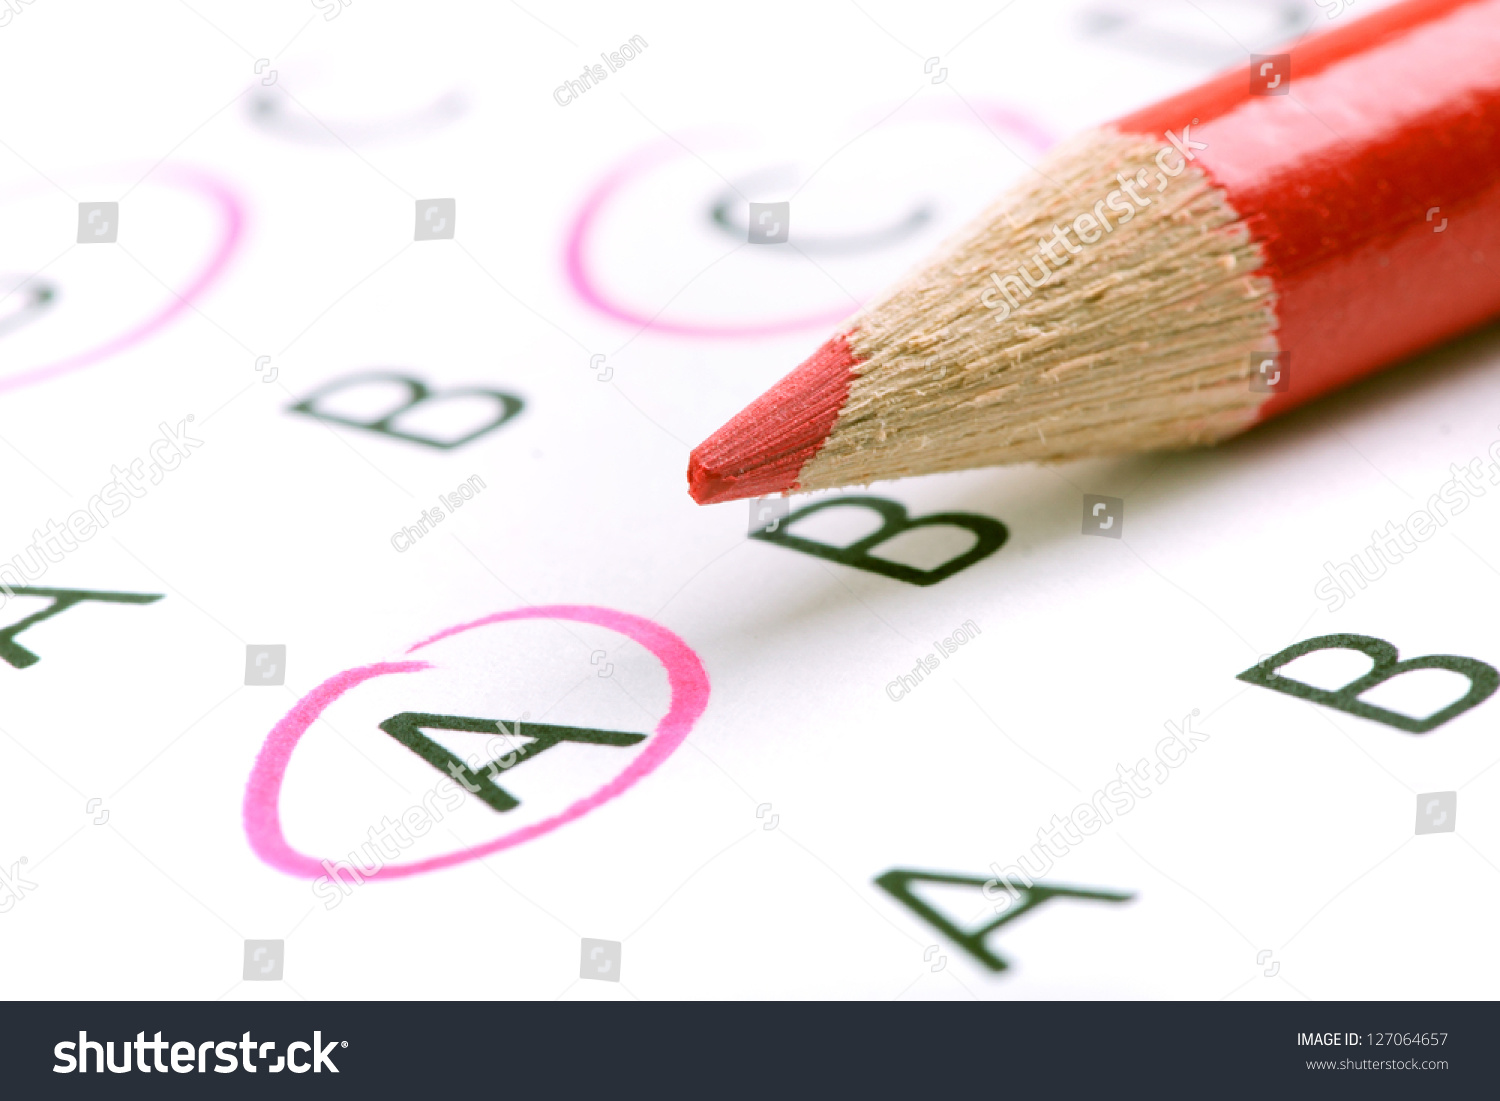 http://image.shutterstock.com/z/stock-photo-test-with-red-pencil-127064657.jpg